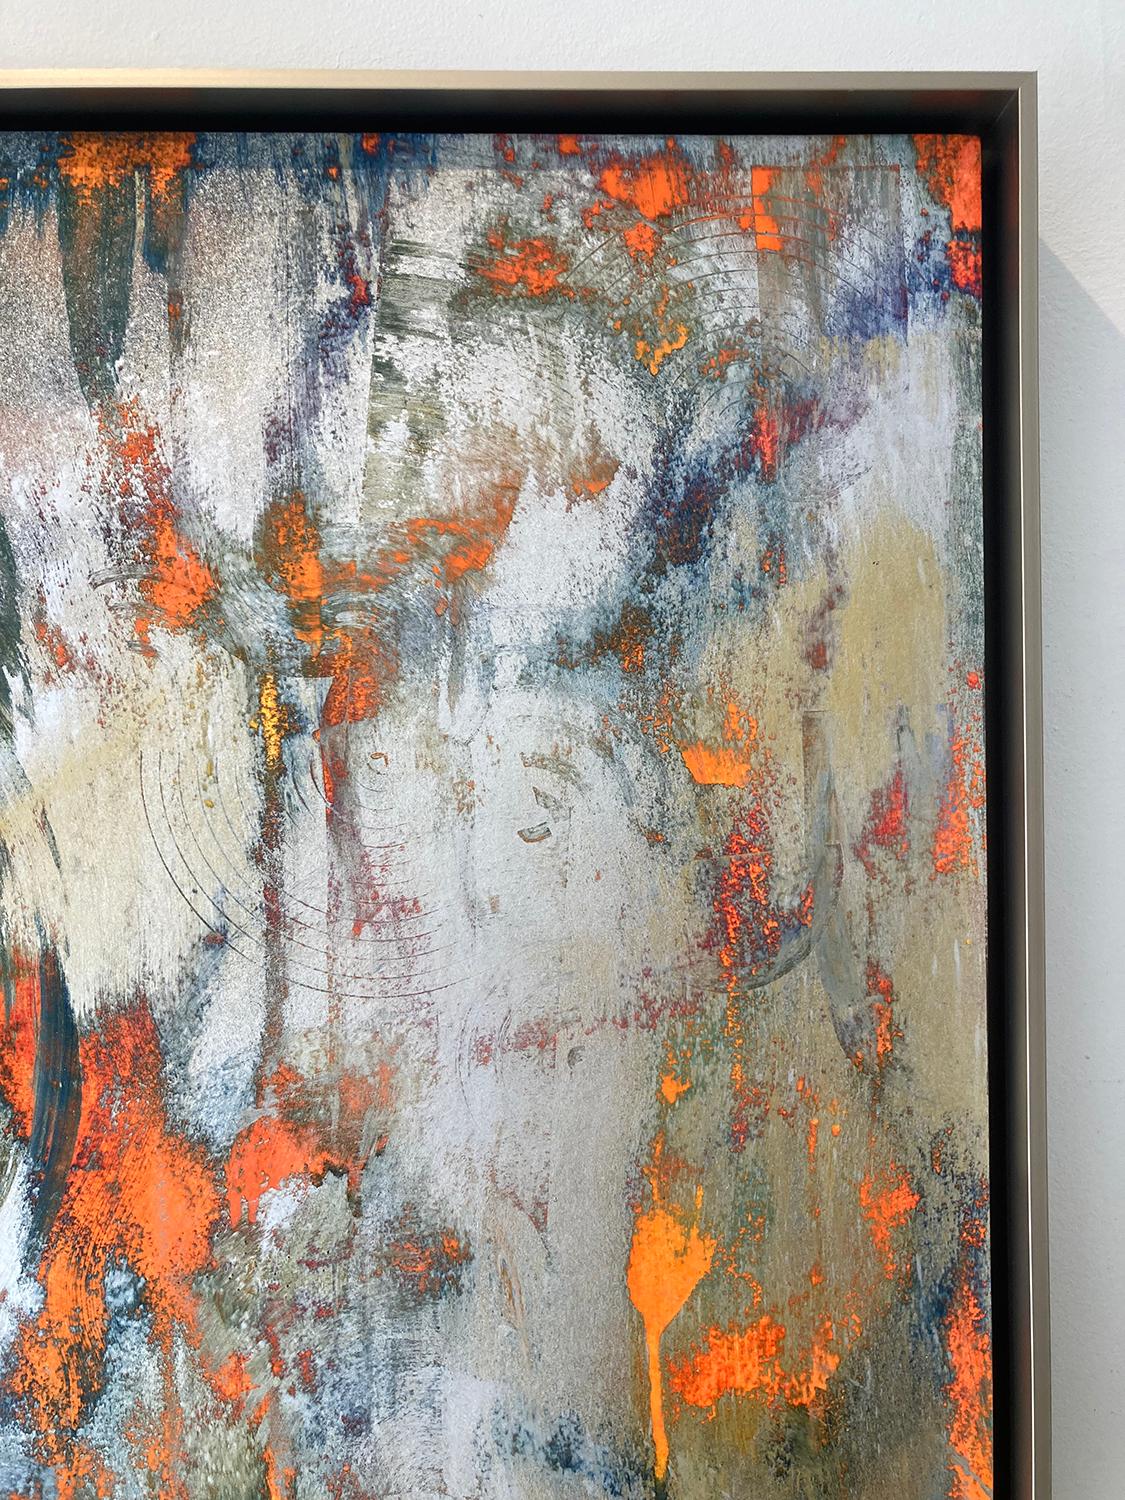 Gestural abstract expressionist painting on archival paper mounted to panel with gold and silver metallic powders and accents of orange and deep blue
